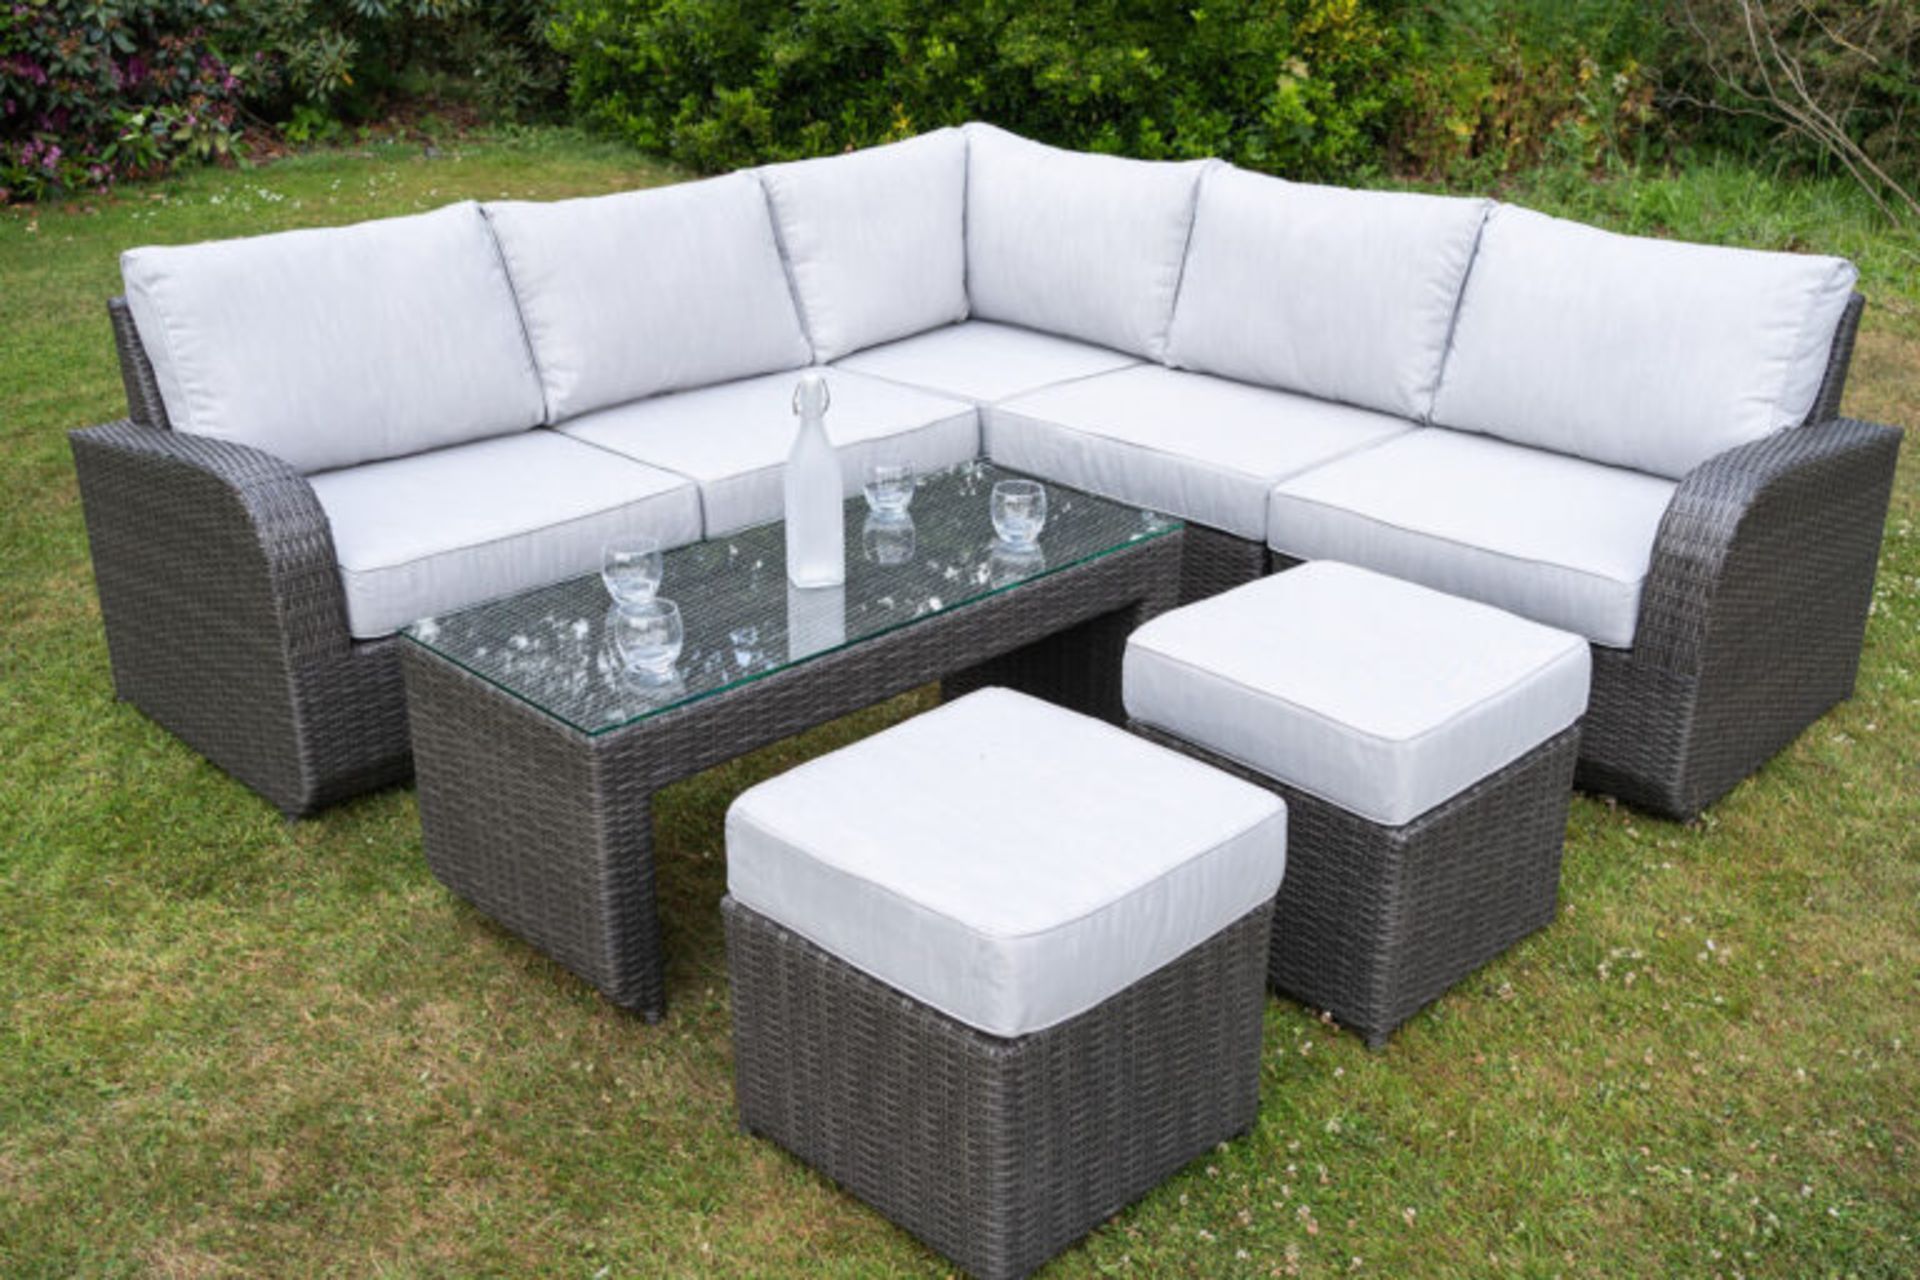 Brand New Moda Furniture 8 Seater Corner Group With Coffee Table in Natural with Cream Cushions. RRP